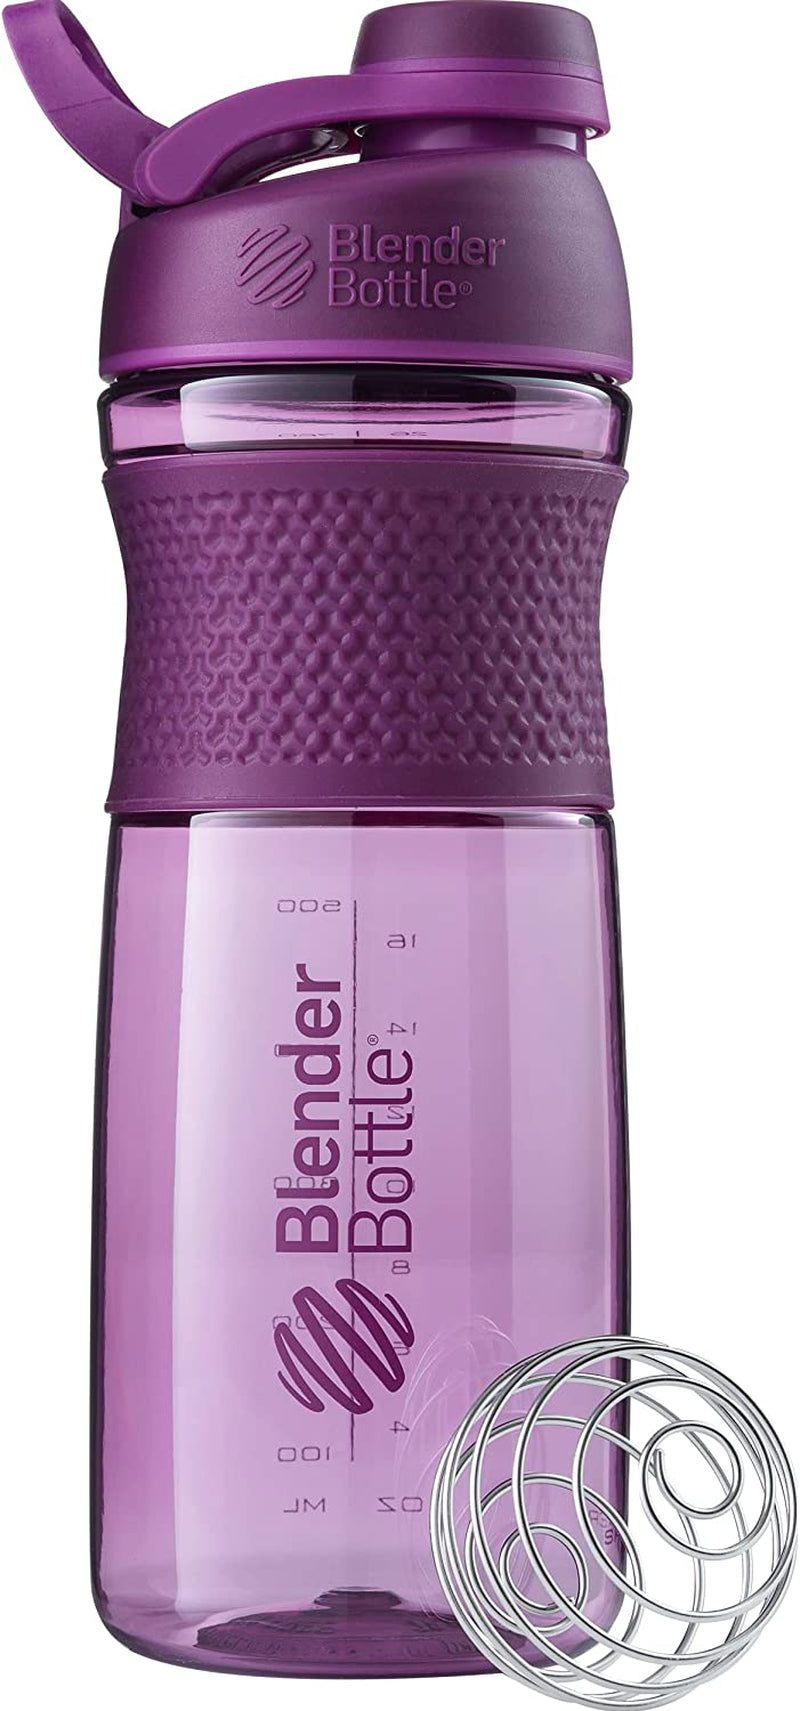 "Ultimate Blenderbottle Sportmixer: Power up with Protein Shakes and Pre Workout! 28-Ounce Plum Shaker Bottle, Unleash the Fitness Beast with 1 Count (Pack of 1)"